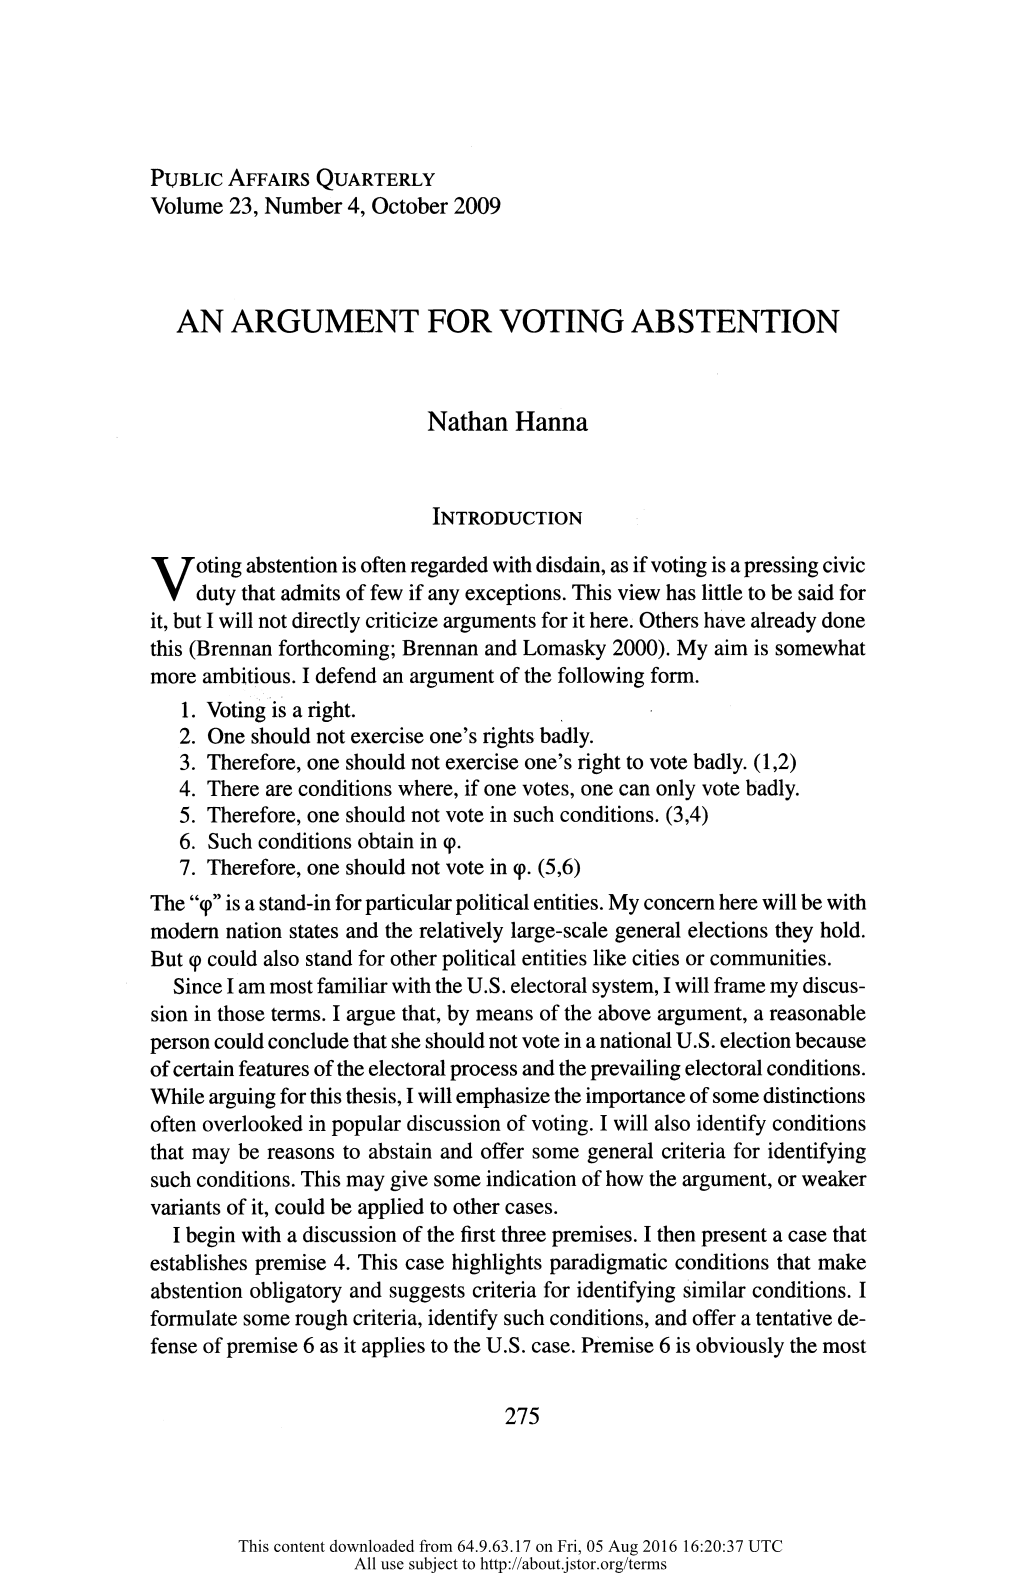 An Argument for Voting Abstention